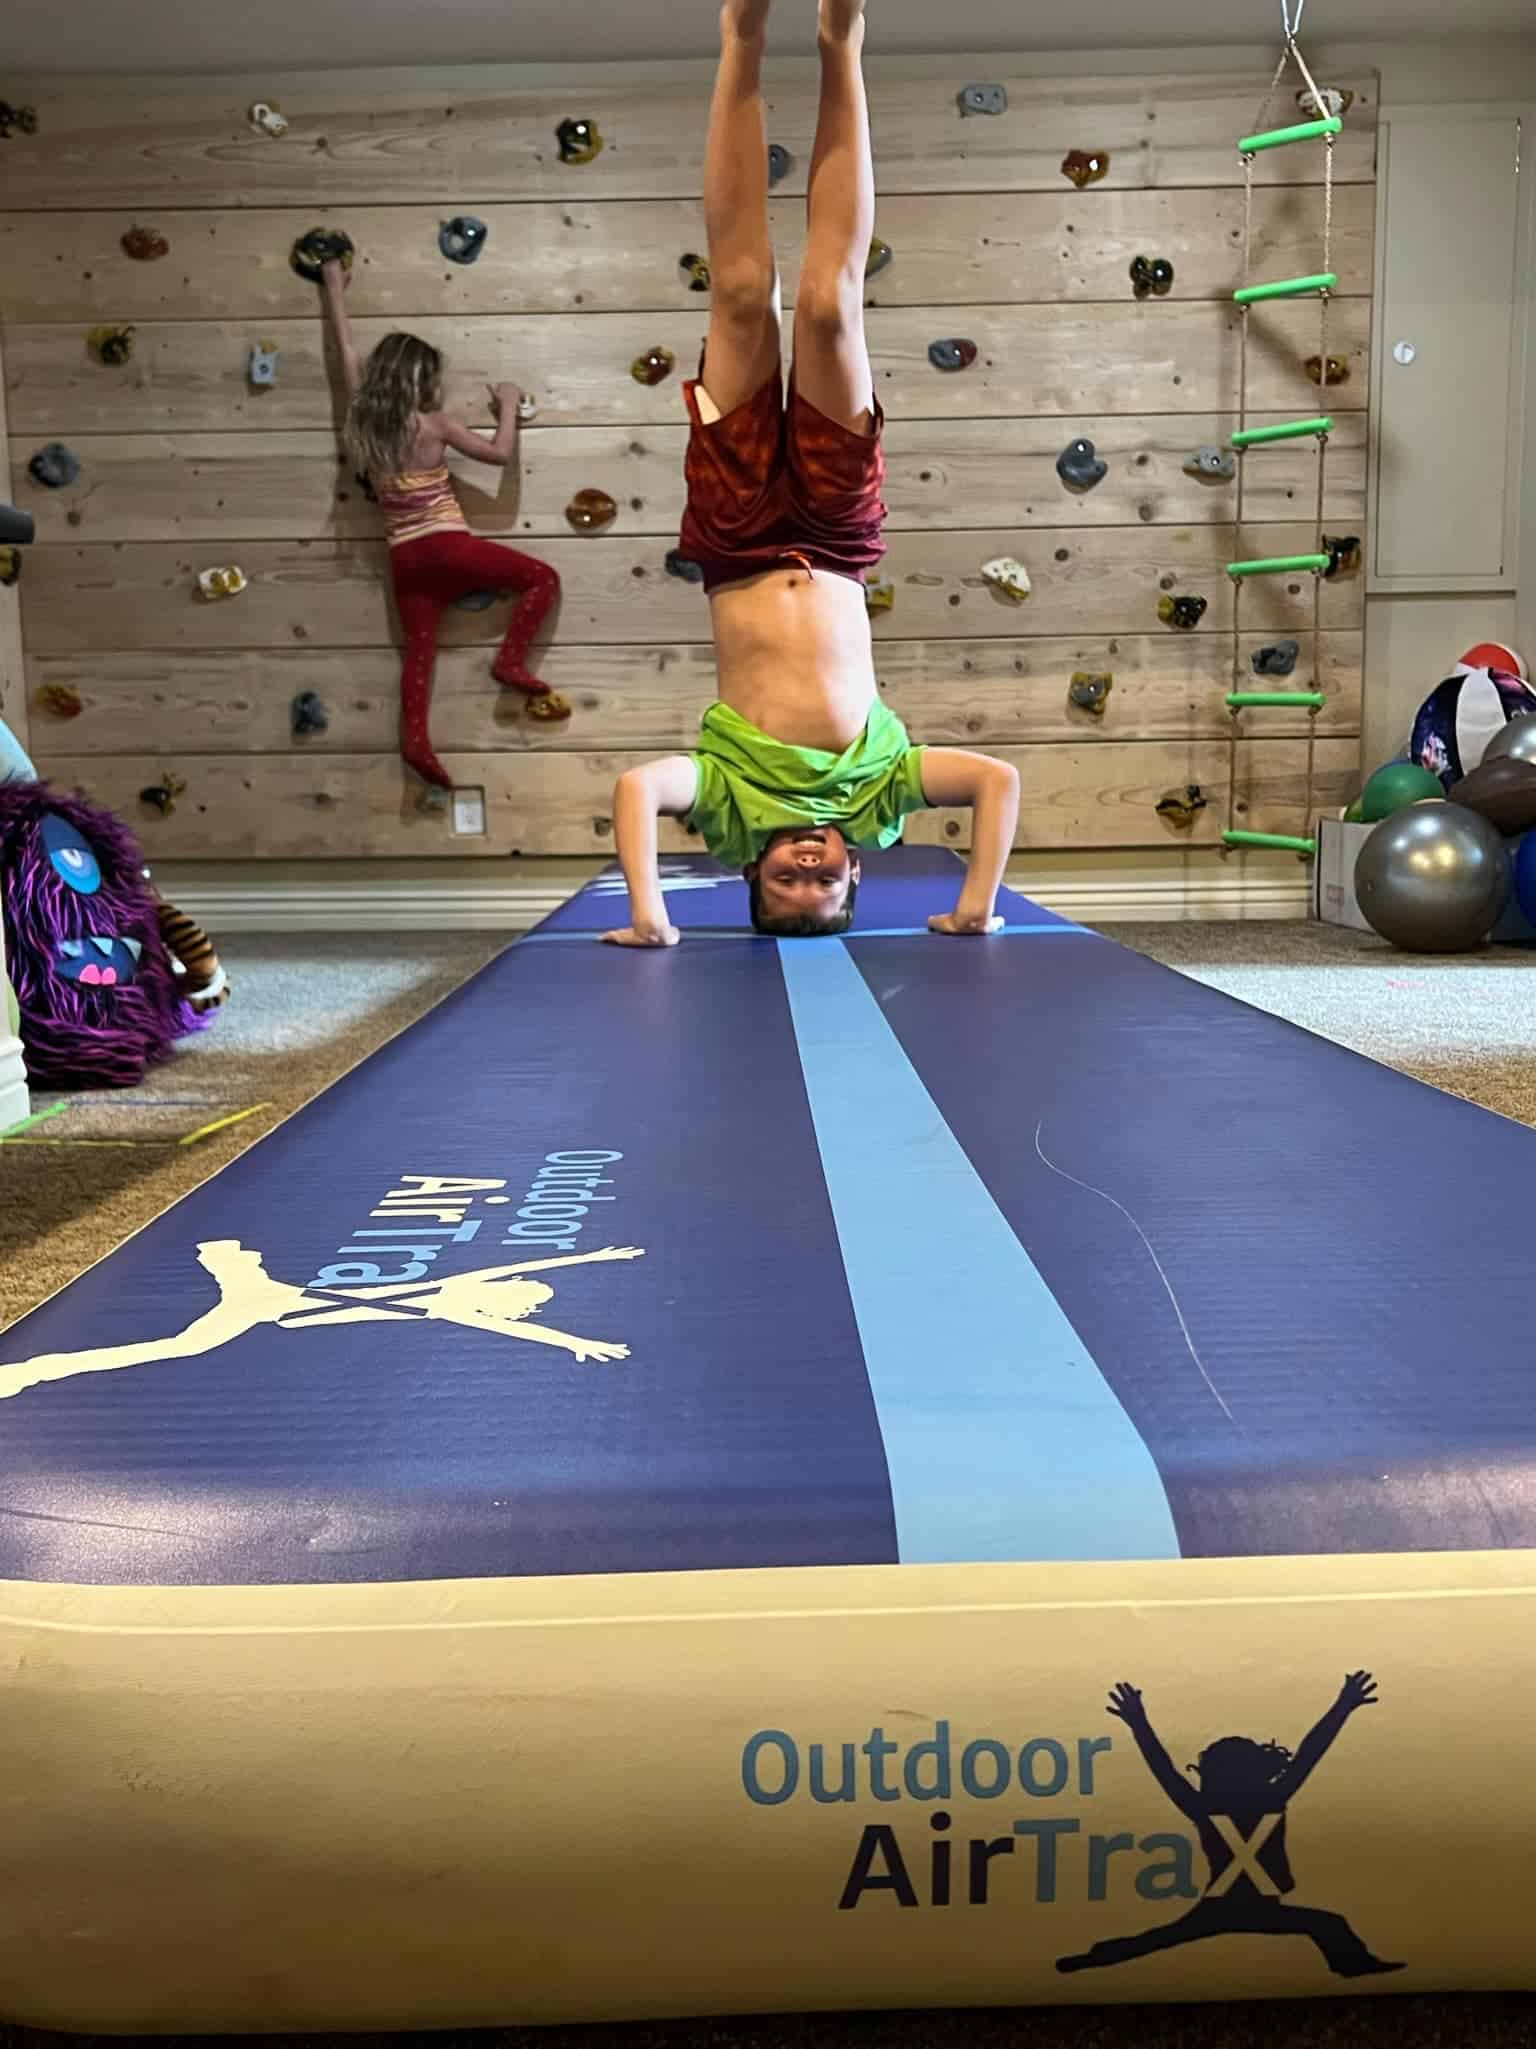 Arlington Texas, Young boy performing gymnastic head stand on air trax in an indoor room where young girl is climbing rock wall in background.